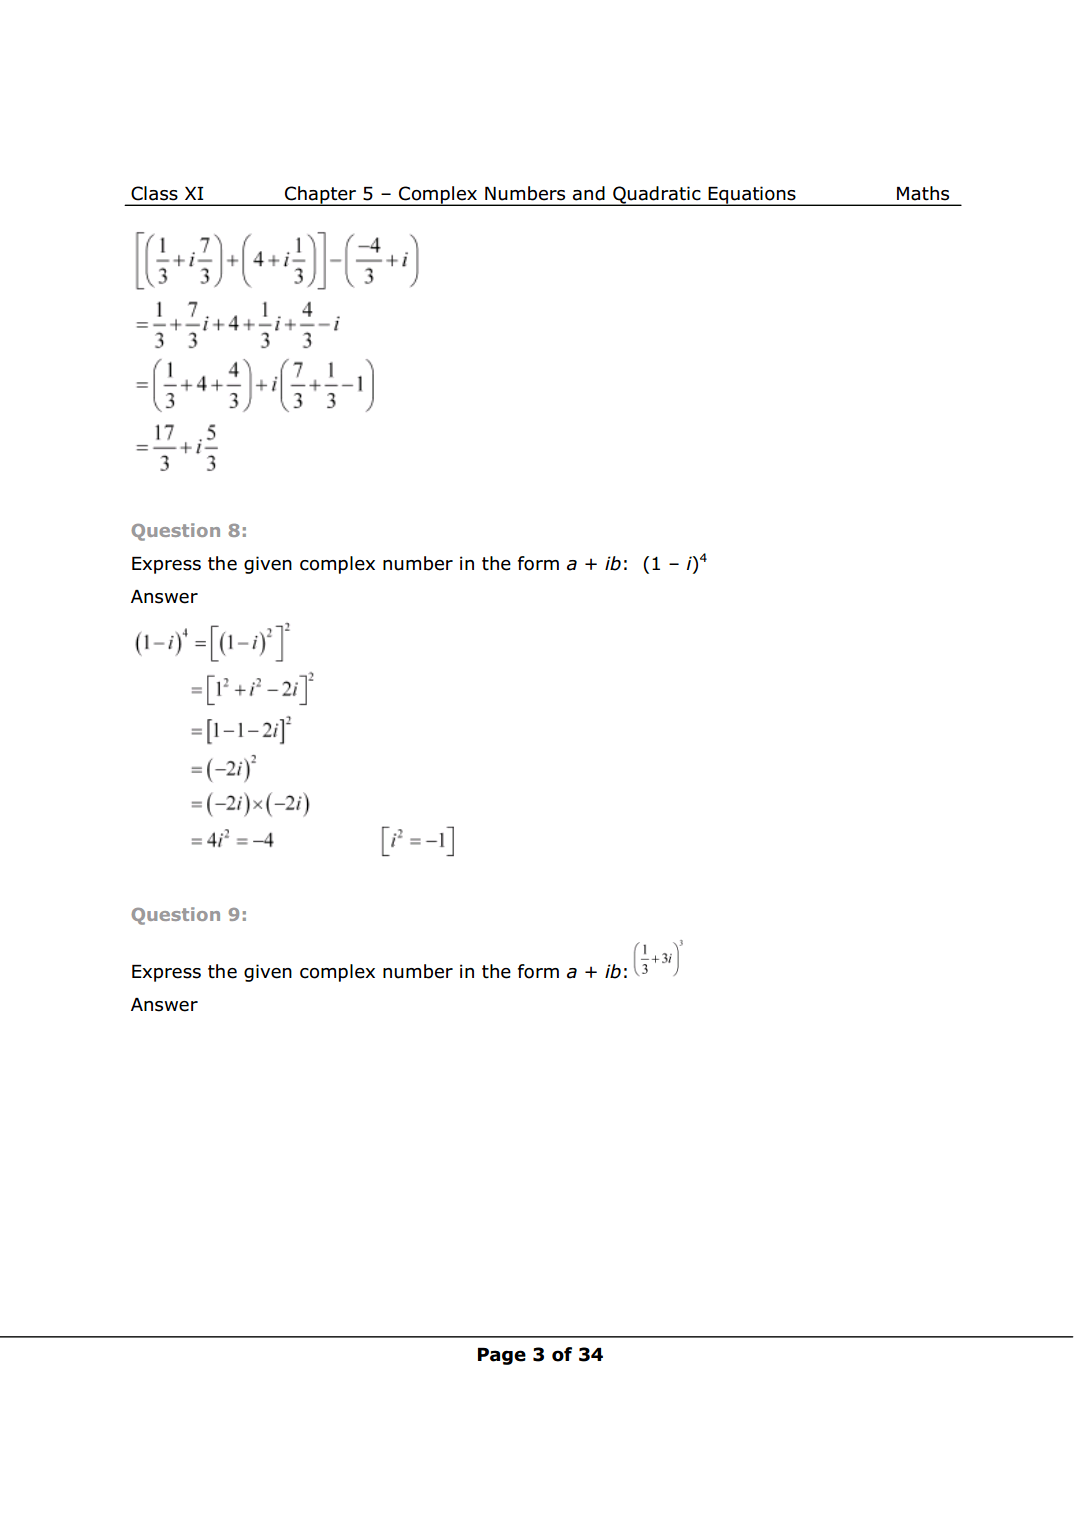 Class 11 math chapter 5 exercise 5.1 Solutions Image 3